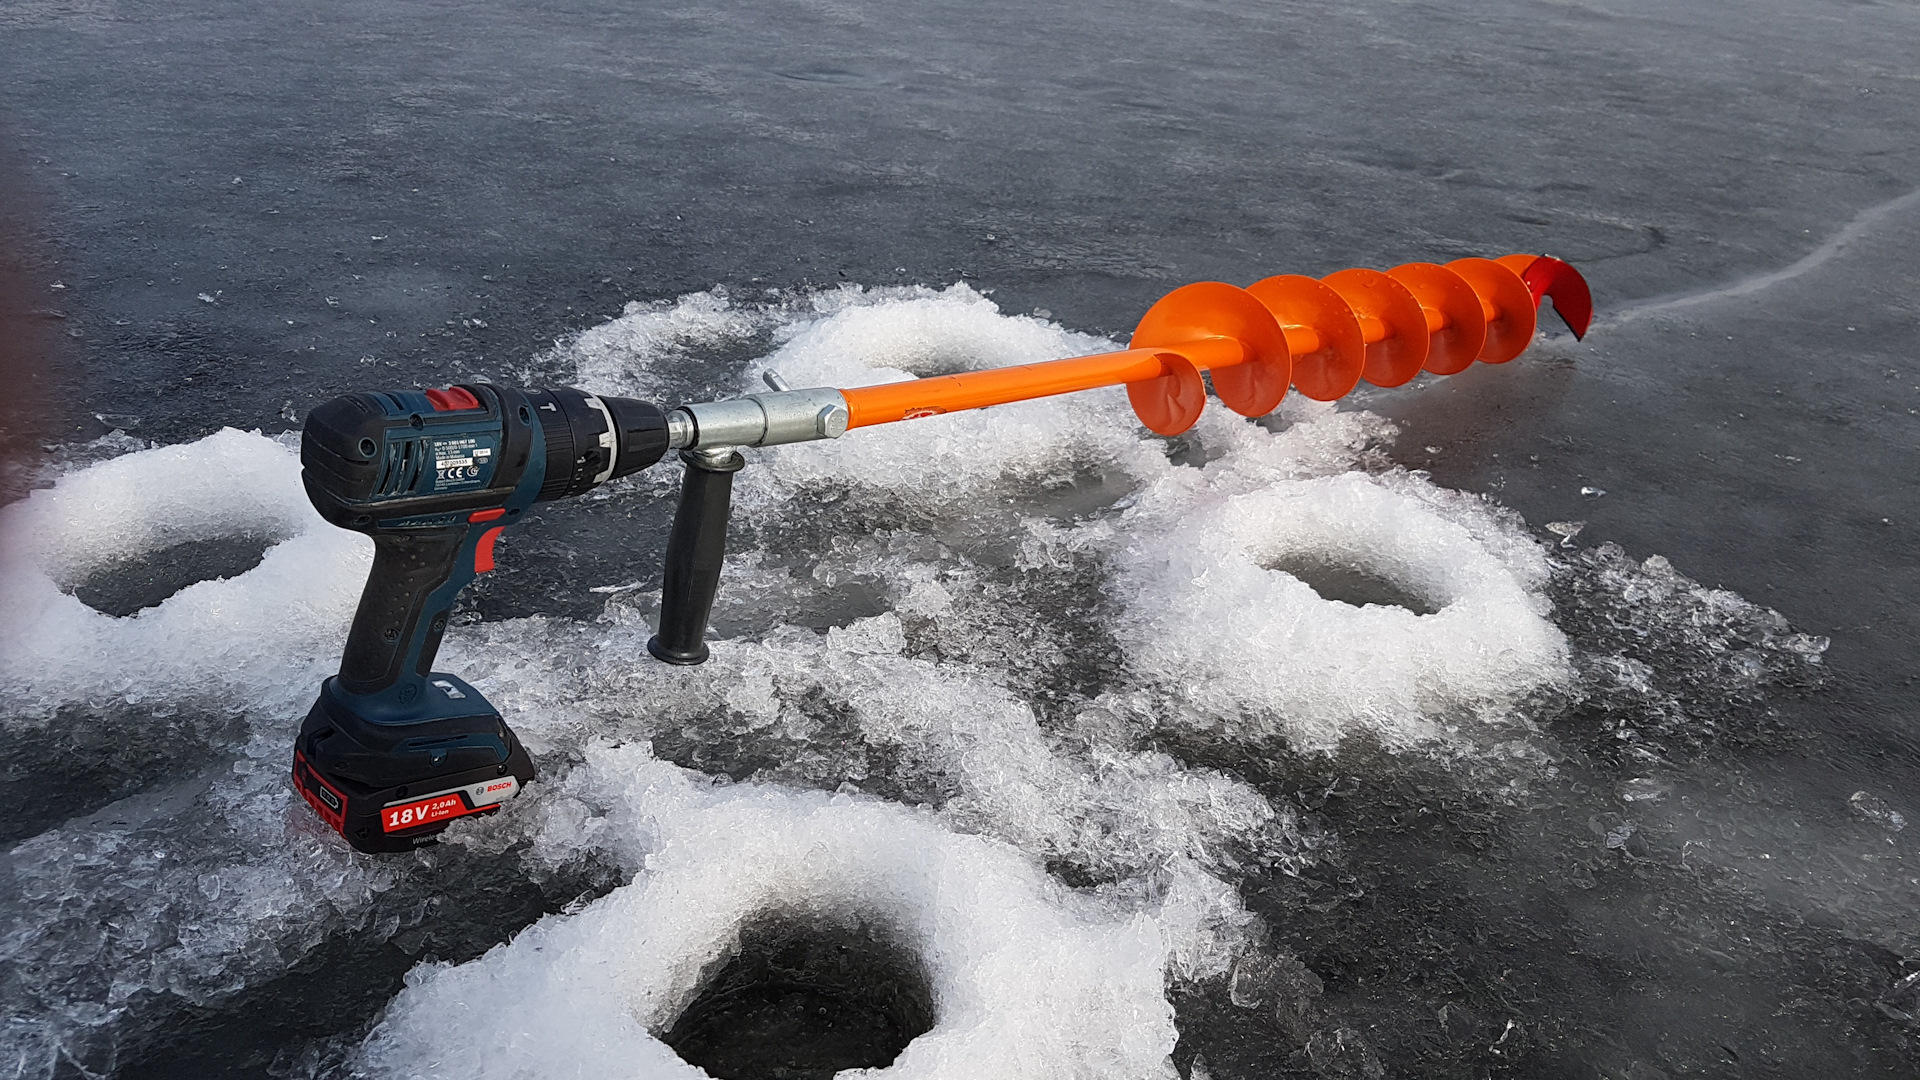 Rating of the best ice drill screwdrivers for ice fishing in 2022